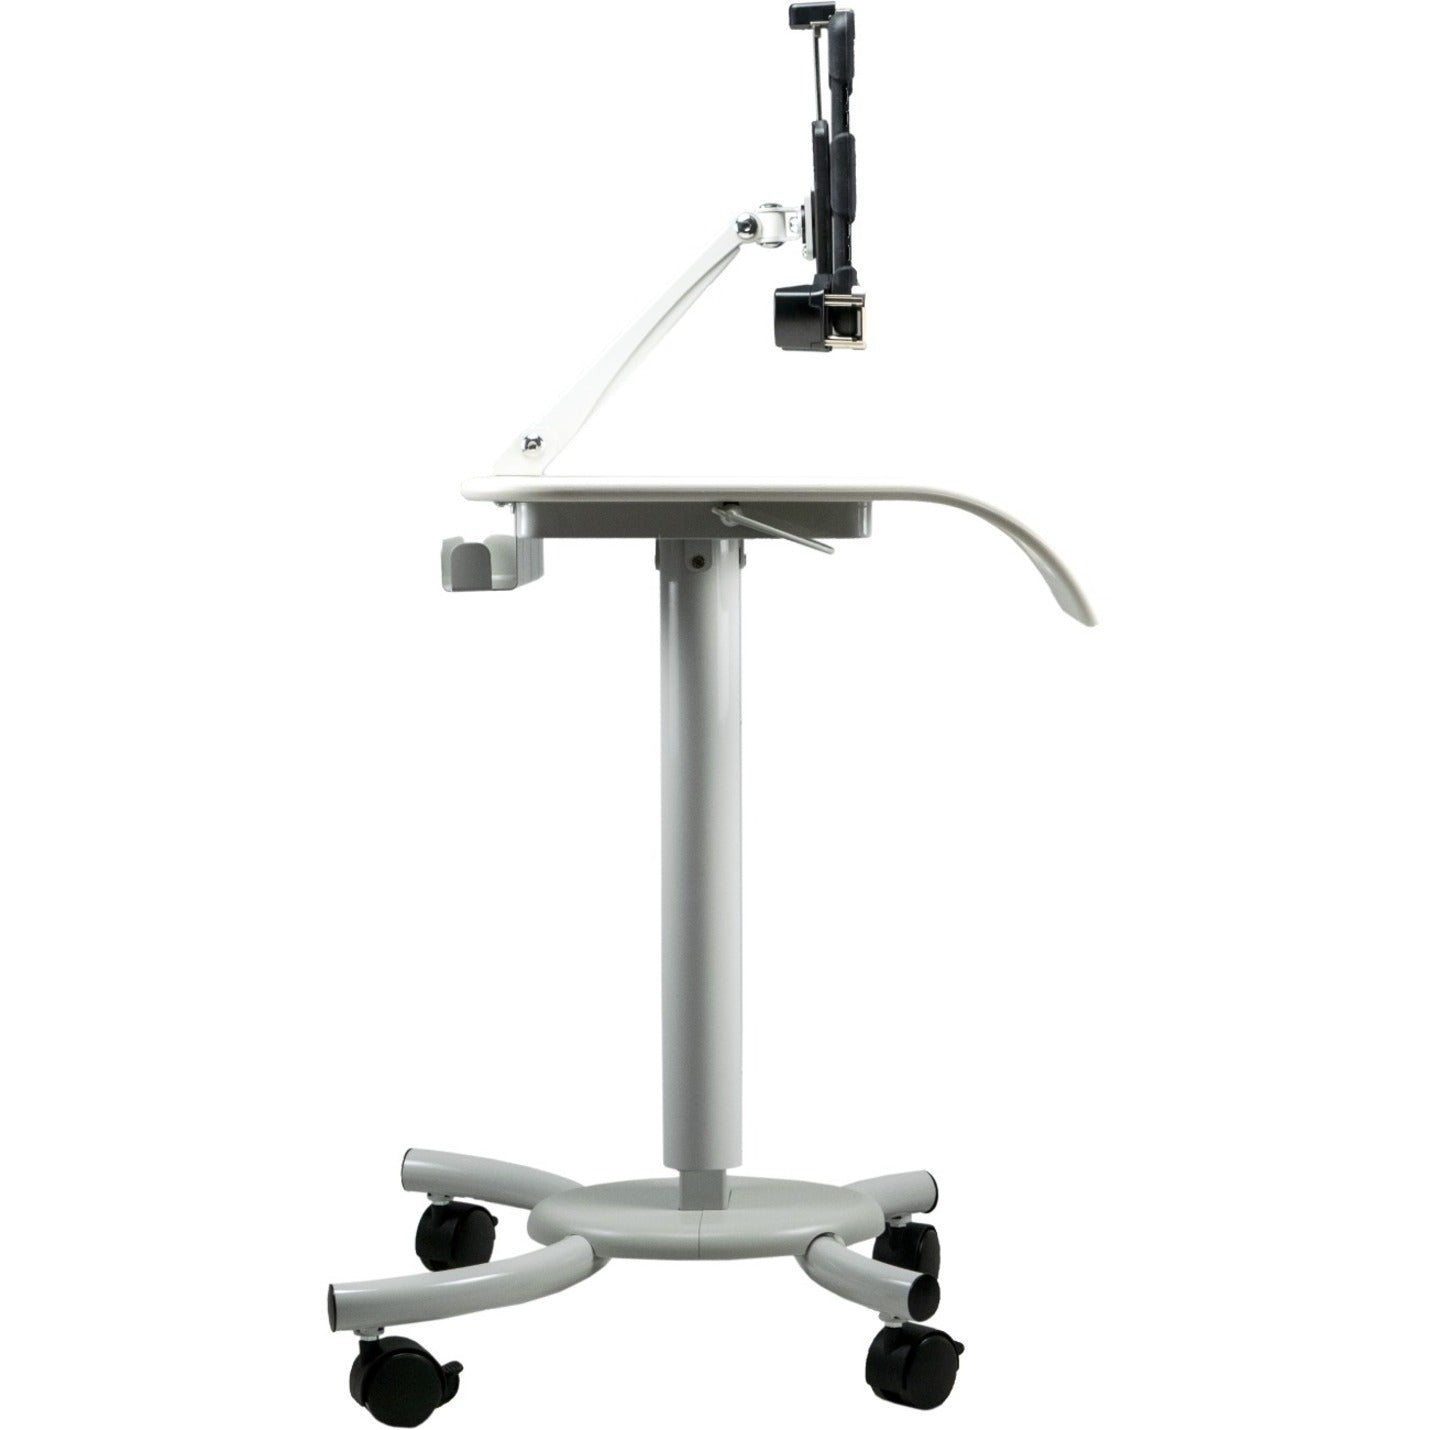 CTA Digital QPAD-HRSW Height-Adjustable Rolling Security Medical Workstation Cart for 7-14 Inch Tablet, Adjustable Handle, Power Strip, Mobility